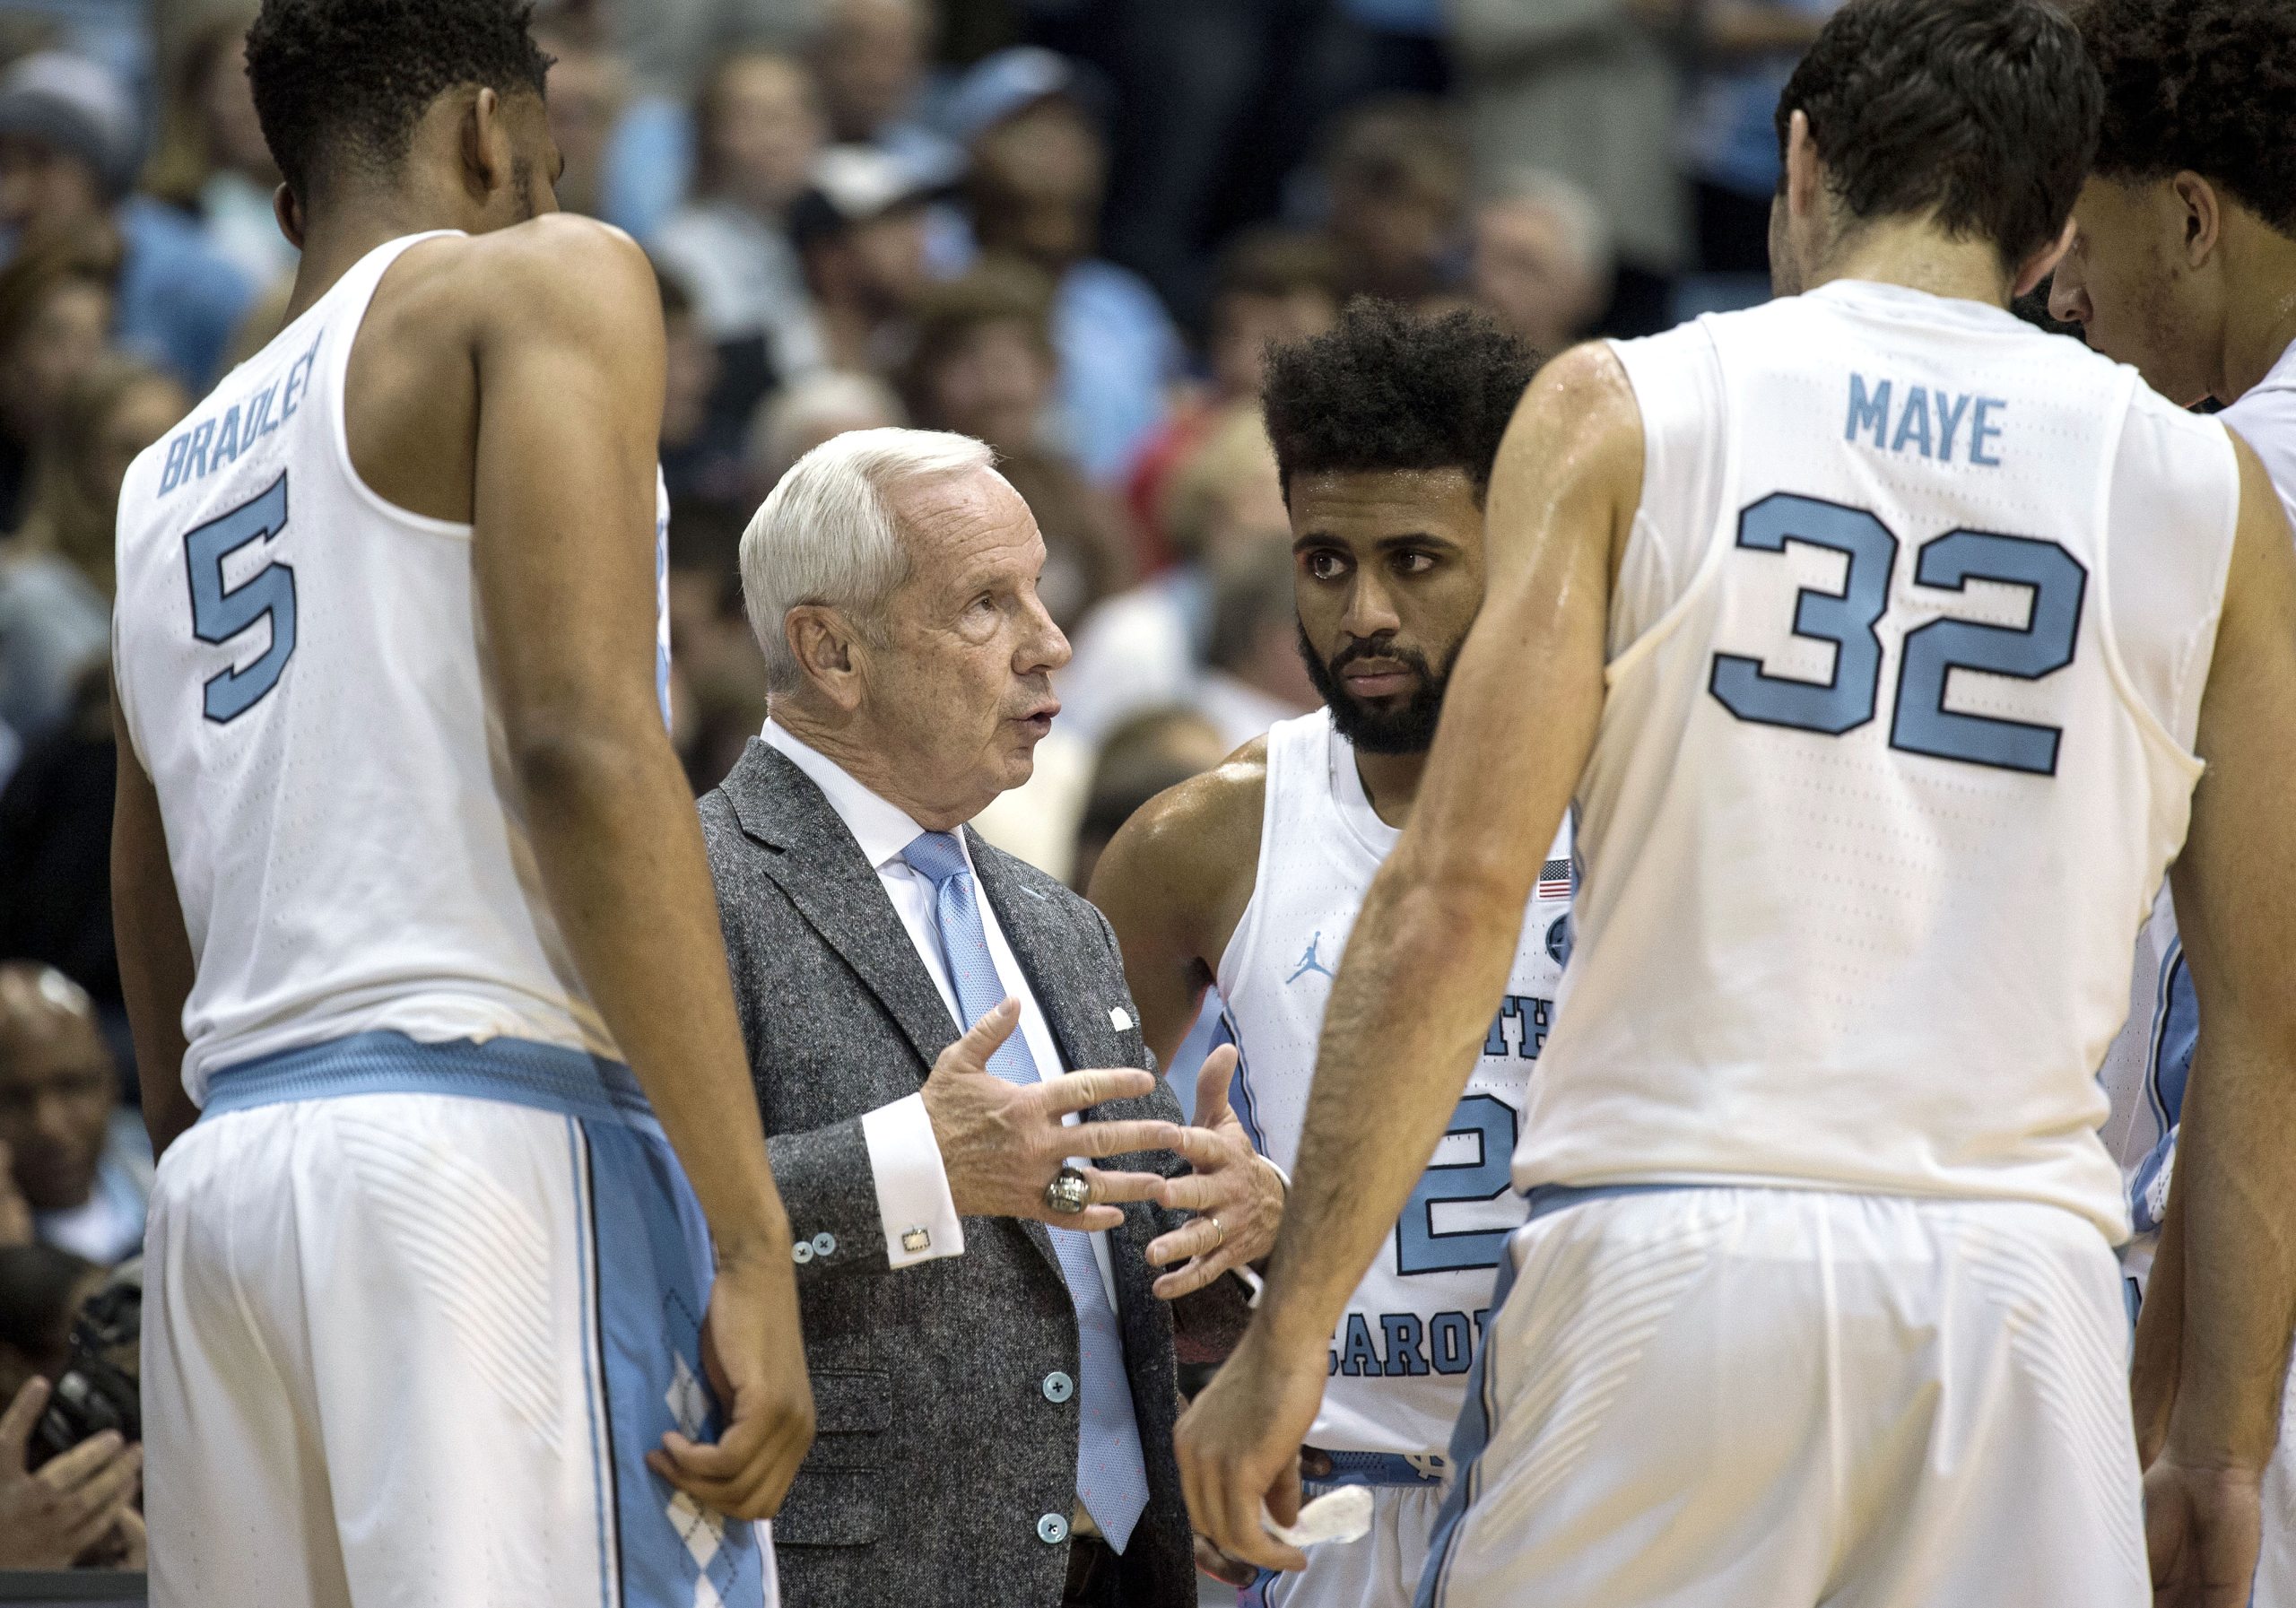 Roy WIlliams speaking with players during a time out.